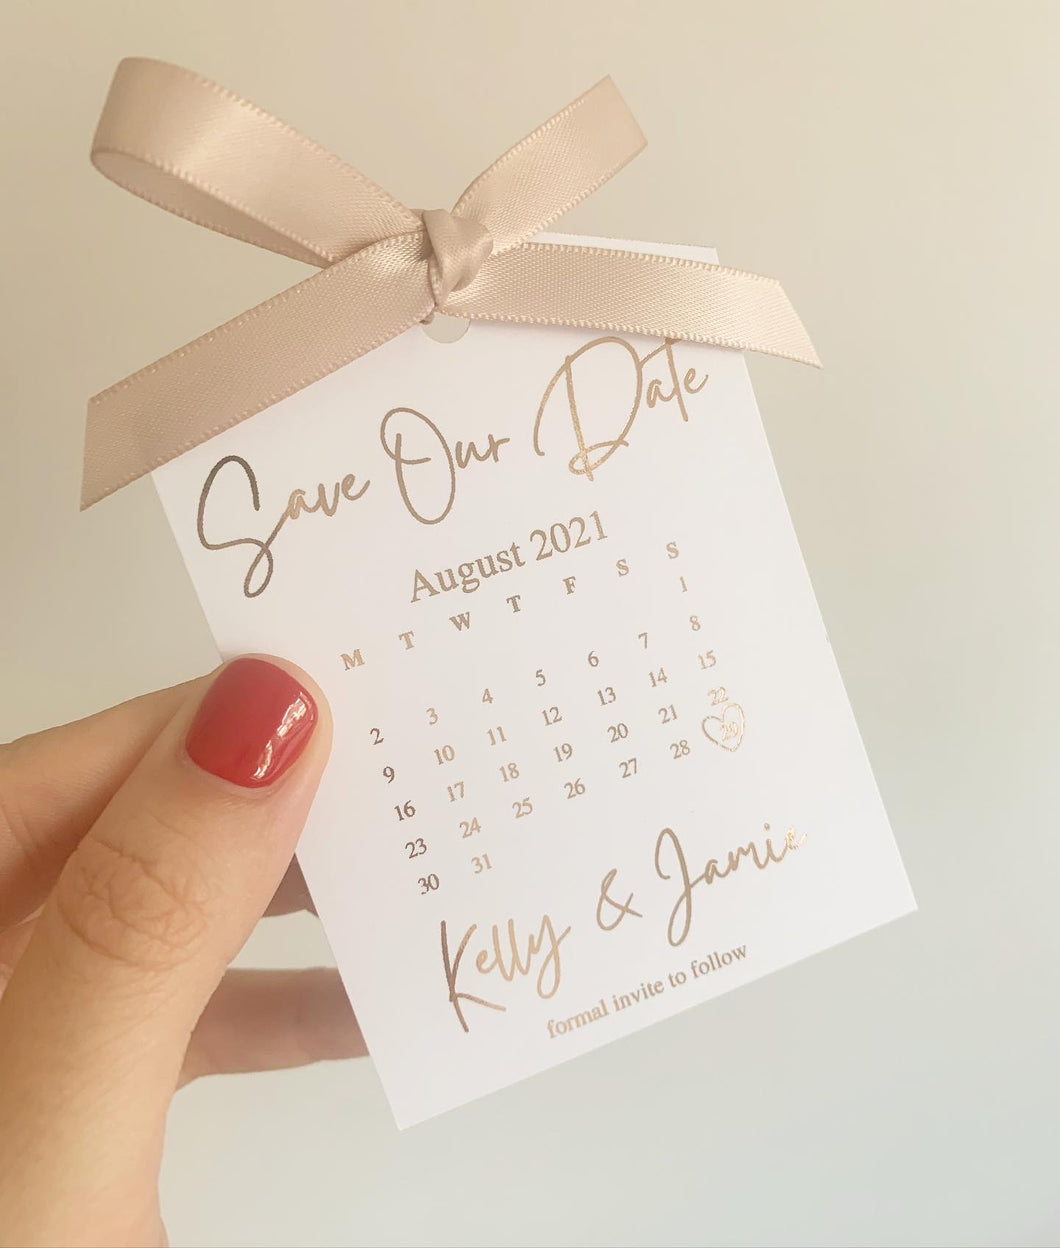 Save the date - calendar style